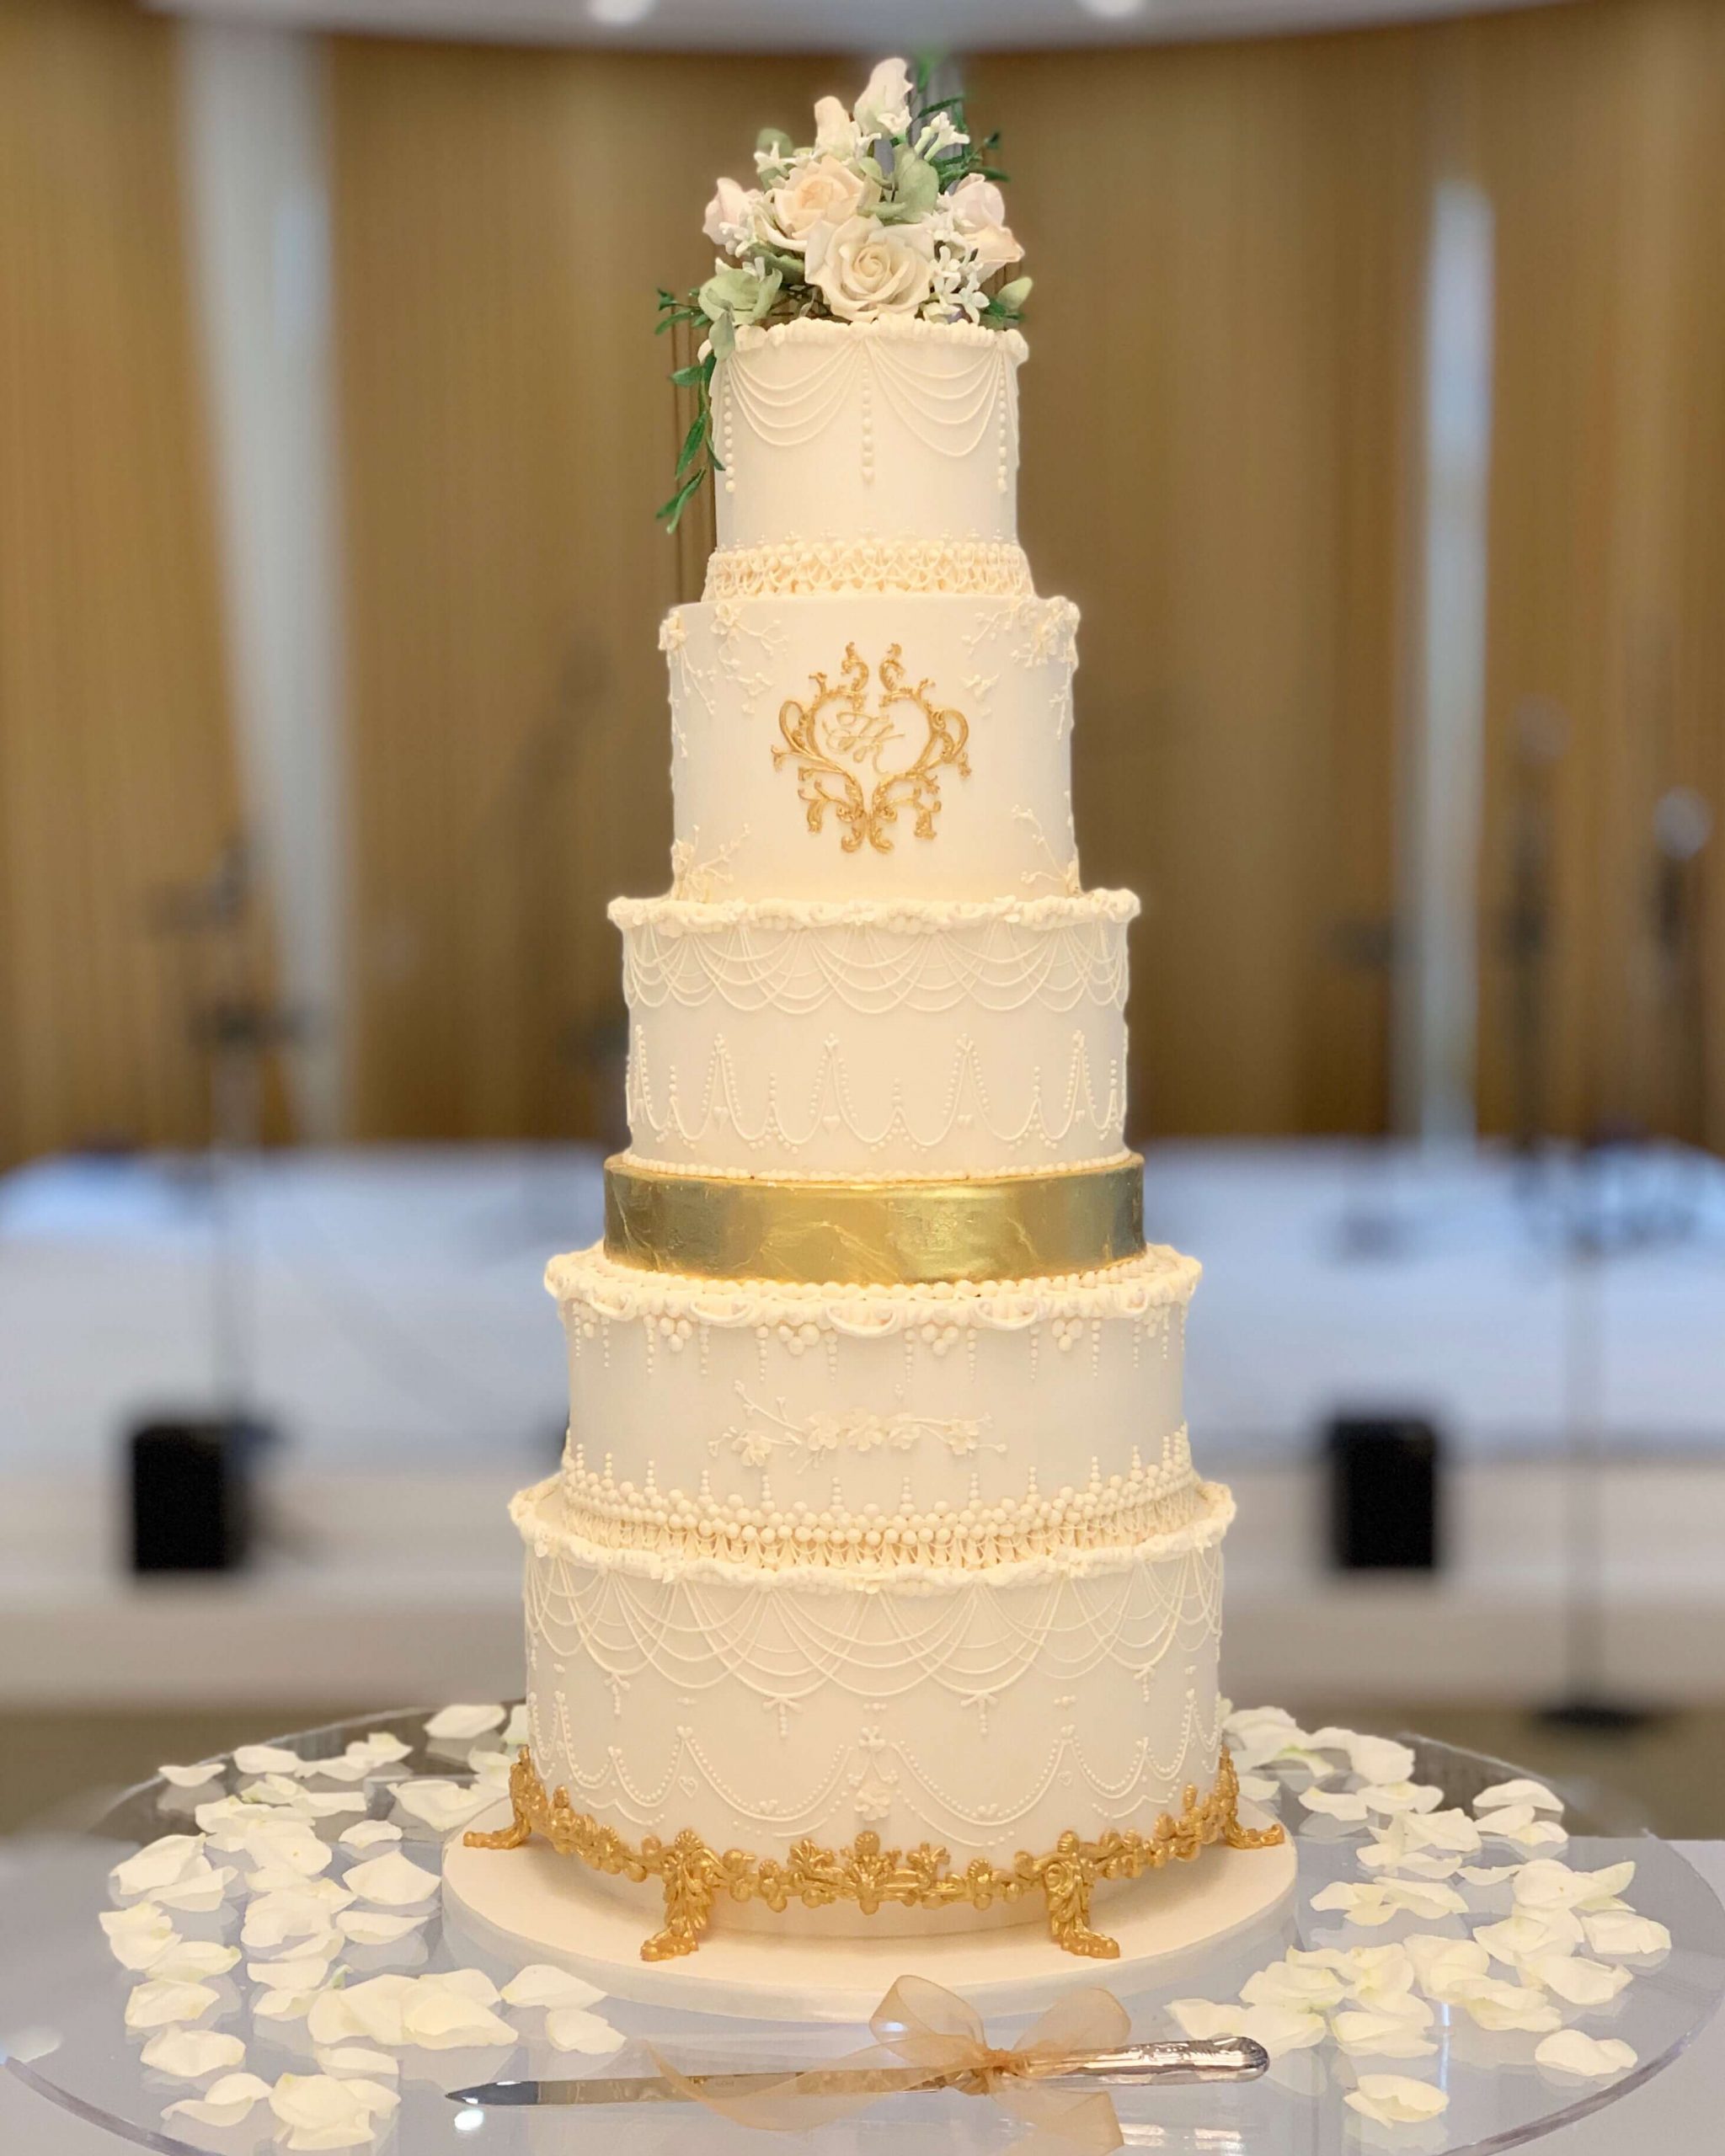 Traditional royal iced wedding cake sugar flowers roses piping piped classic romantic 5 tier lambeth vintage elegant luxury gold leaf white